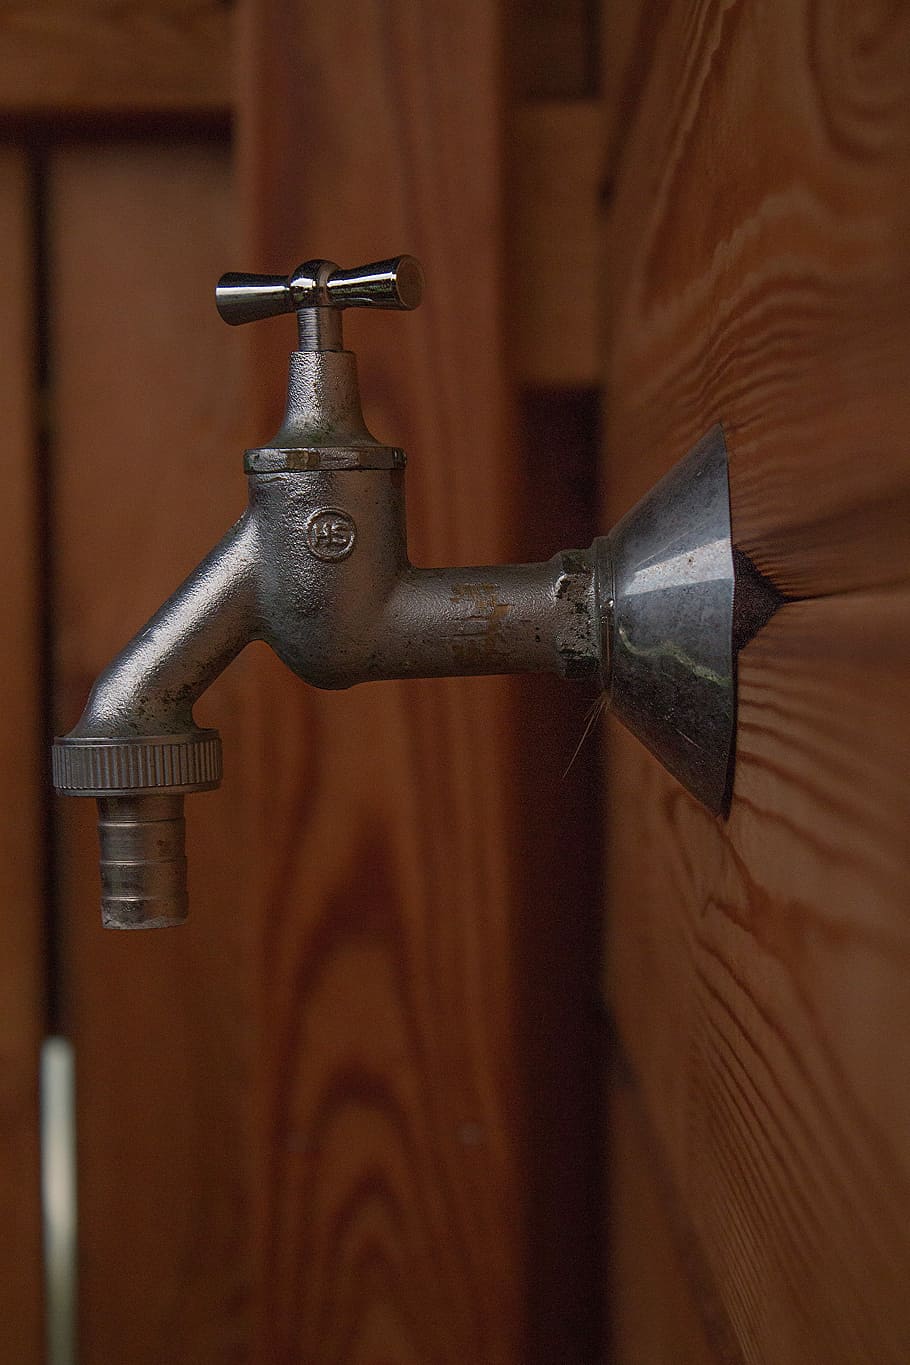 Faucet, Metal, Stainless Steel, metallic, door, close-up, wood - material, focus on foreground, day, indoors